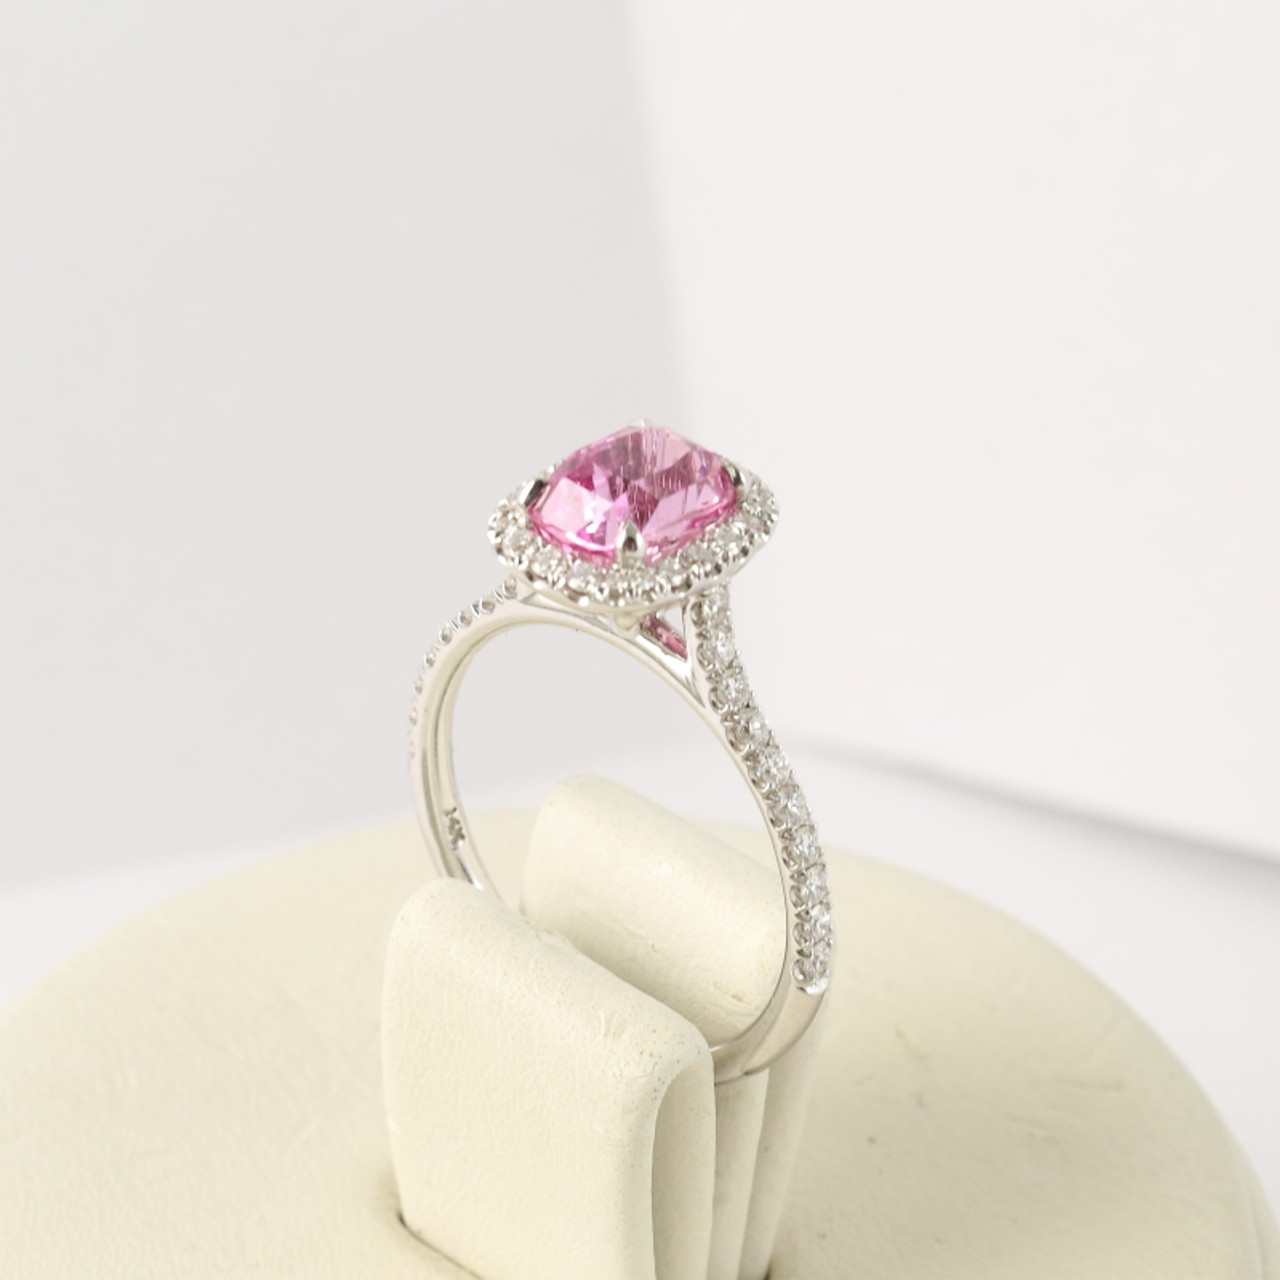 Pink Sapphire 2.02 Cts in 14Kt White Gold Ring Unheated Sapphire